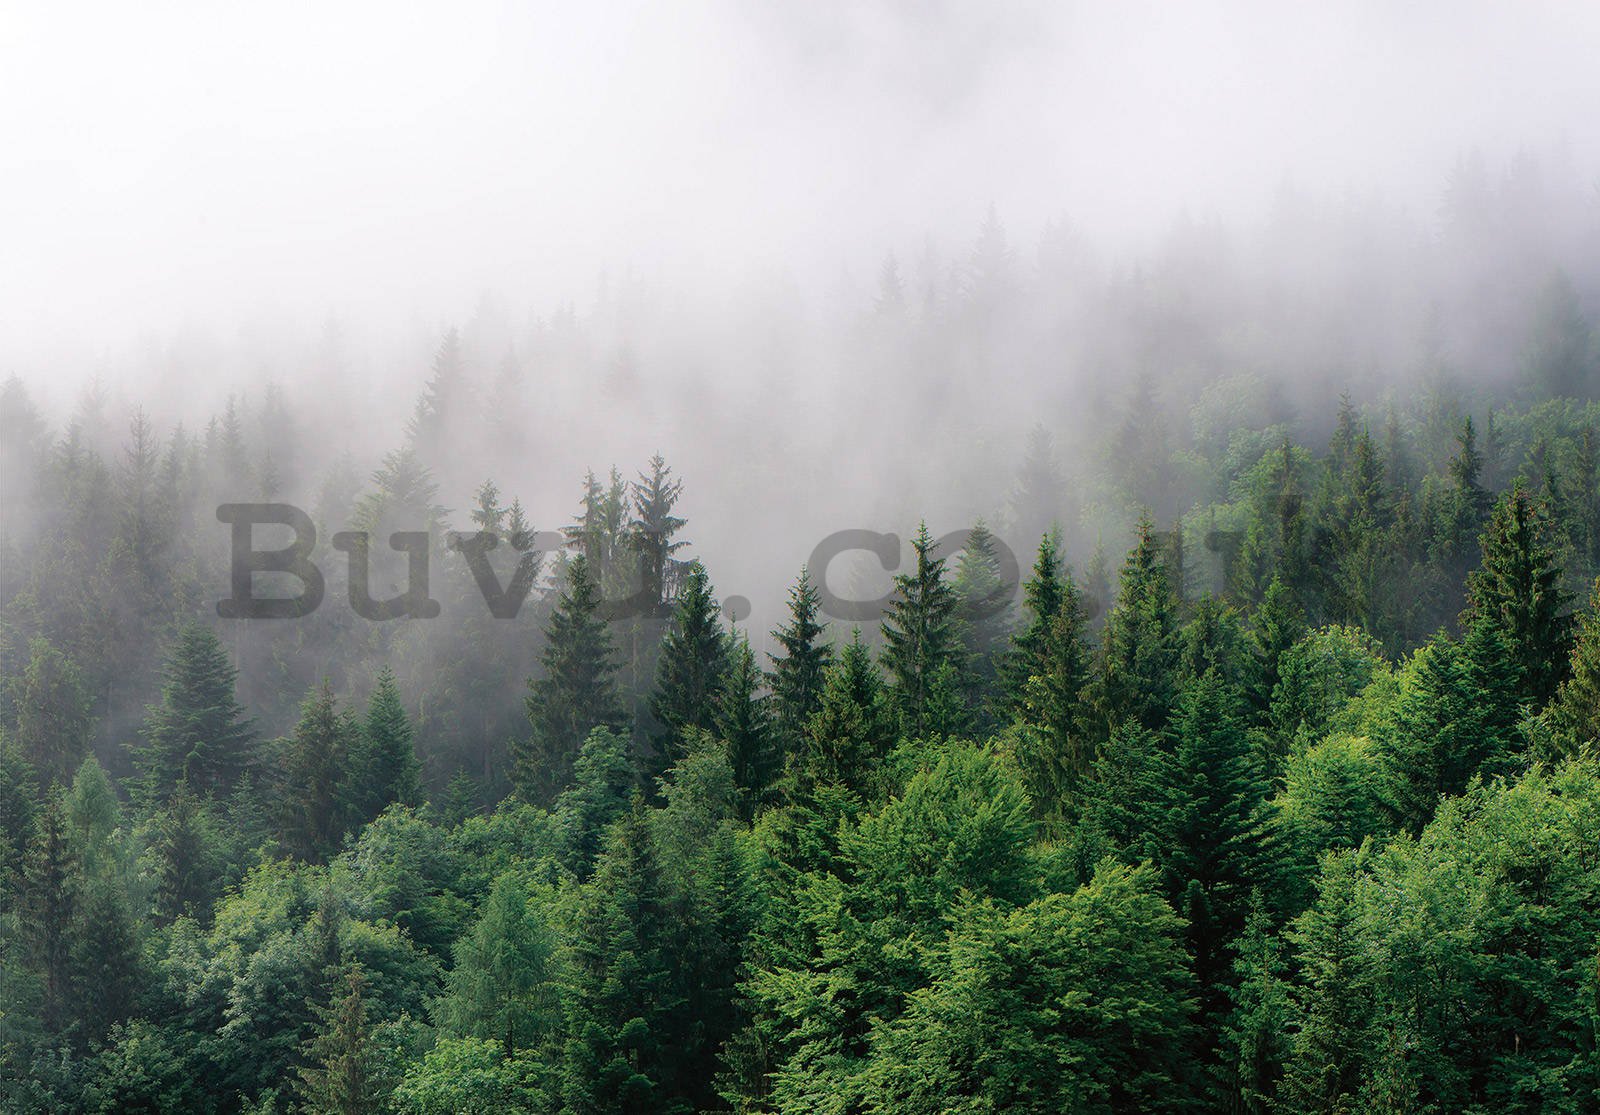 Wall mural vlies: Fog over the forest (2) - 104x70,5 cm